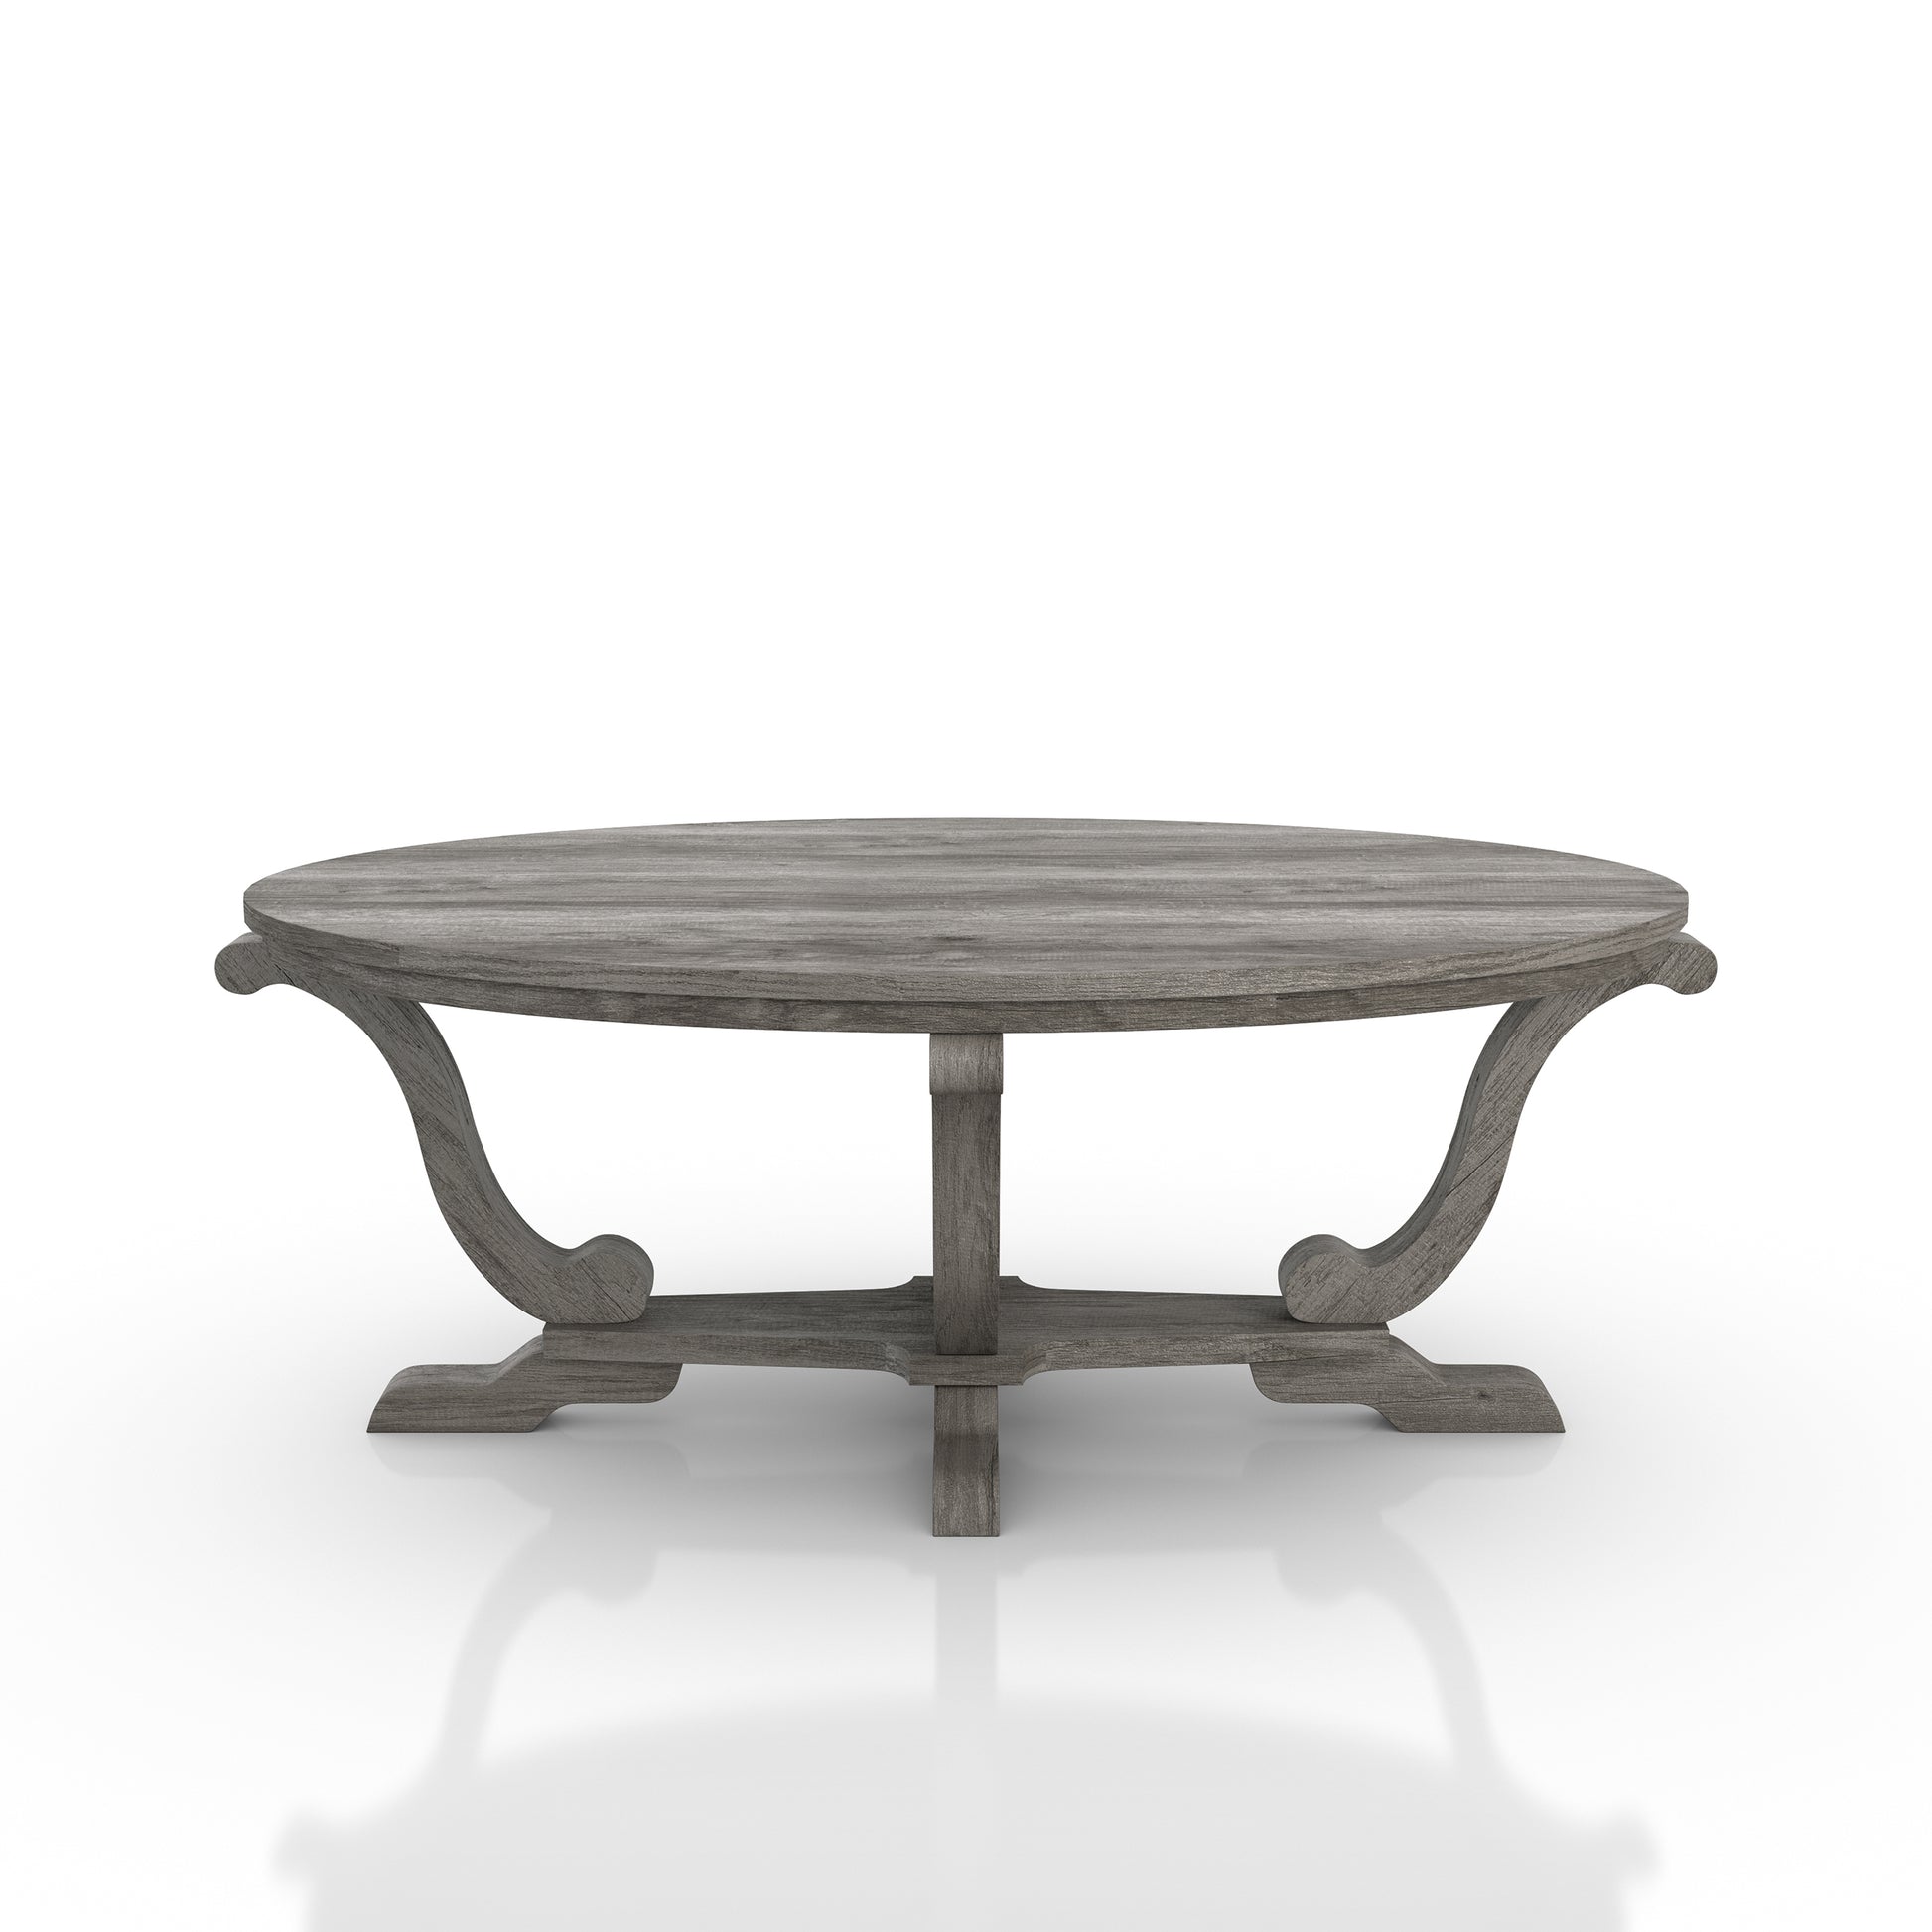 Front-facing farmhouse vintage gray oak curved pedestal coffee table on a white background